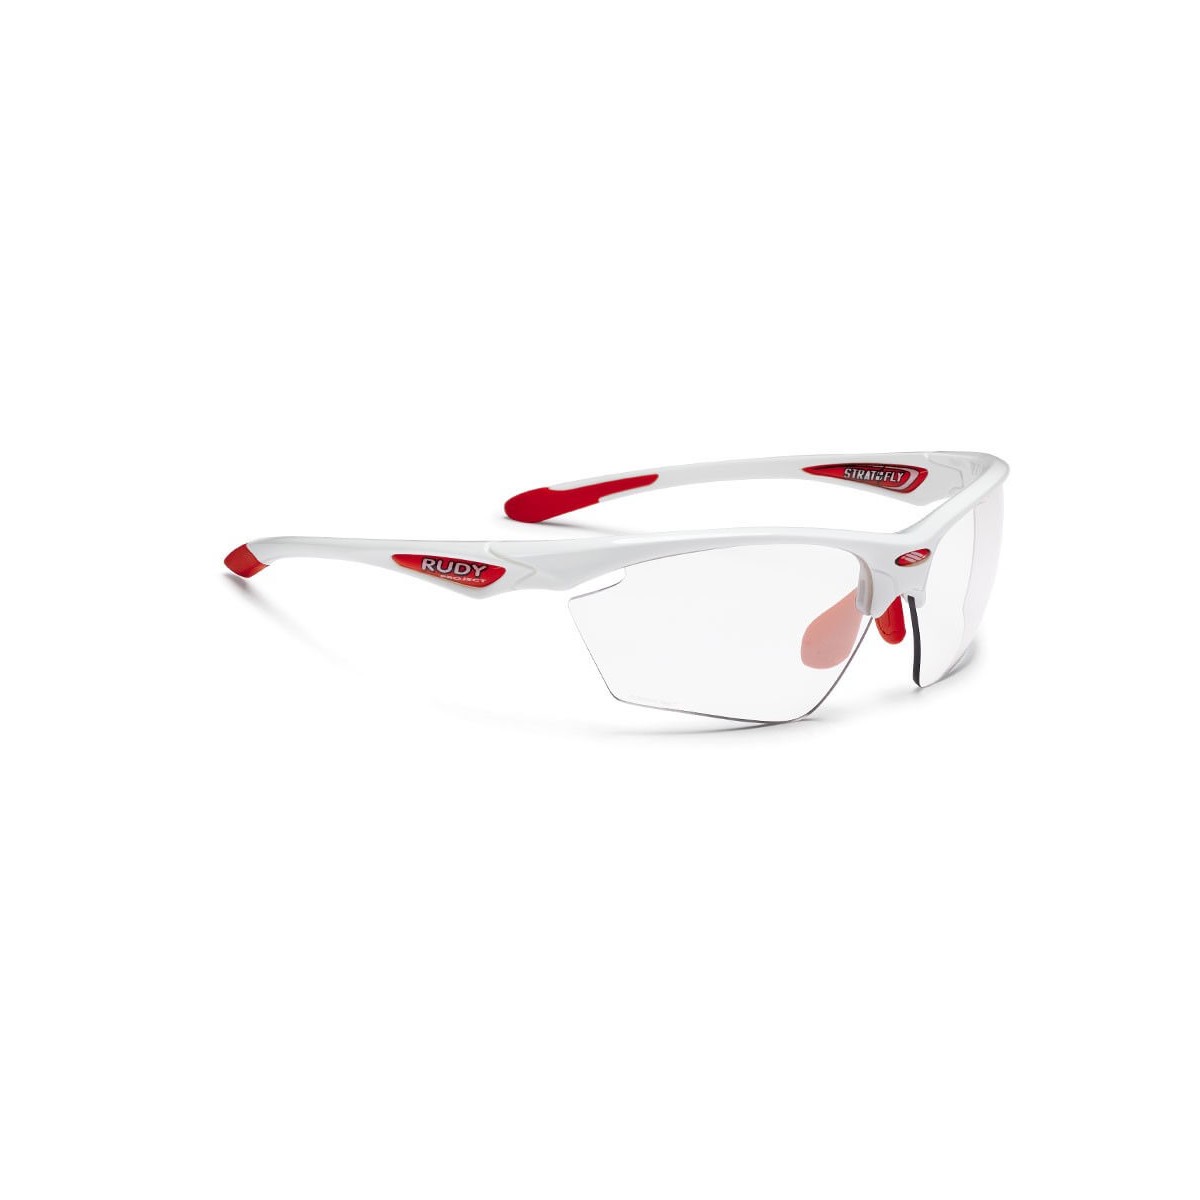 Brille Stratofly White Gloss RPO Photoclear Rudy Project